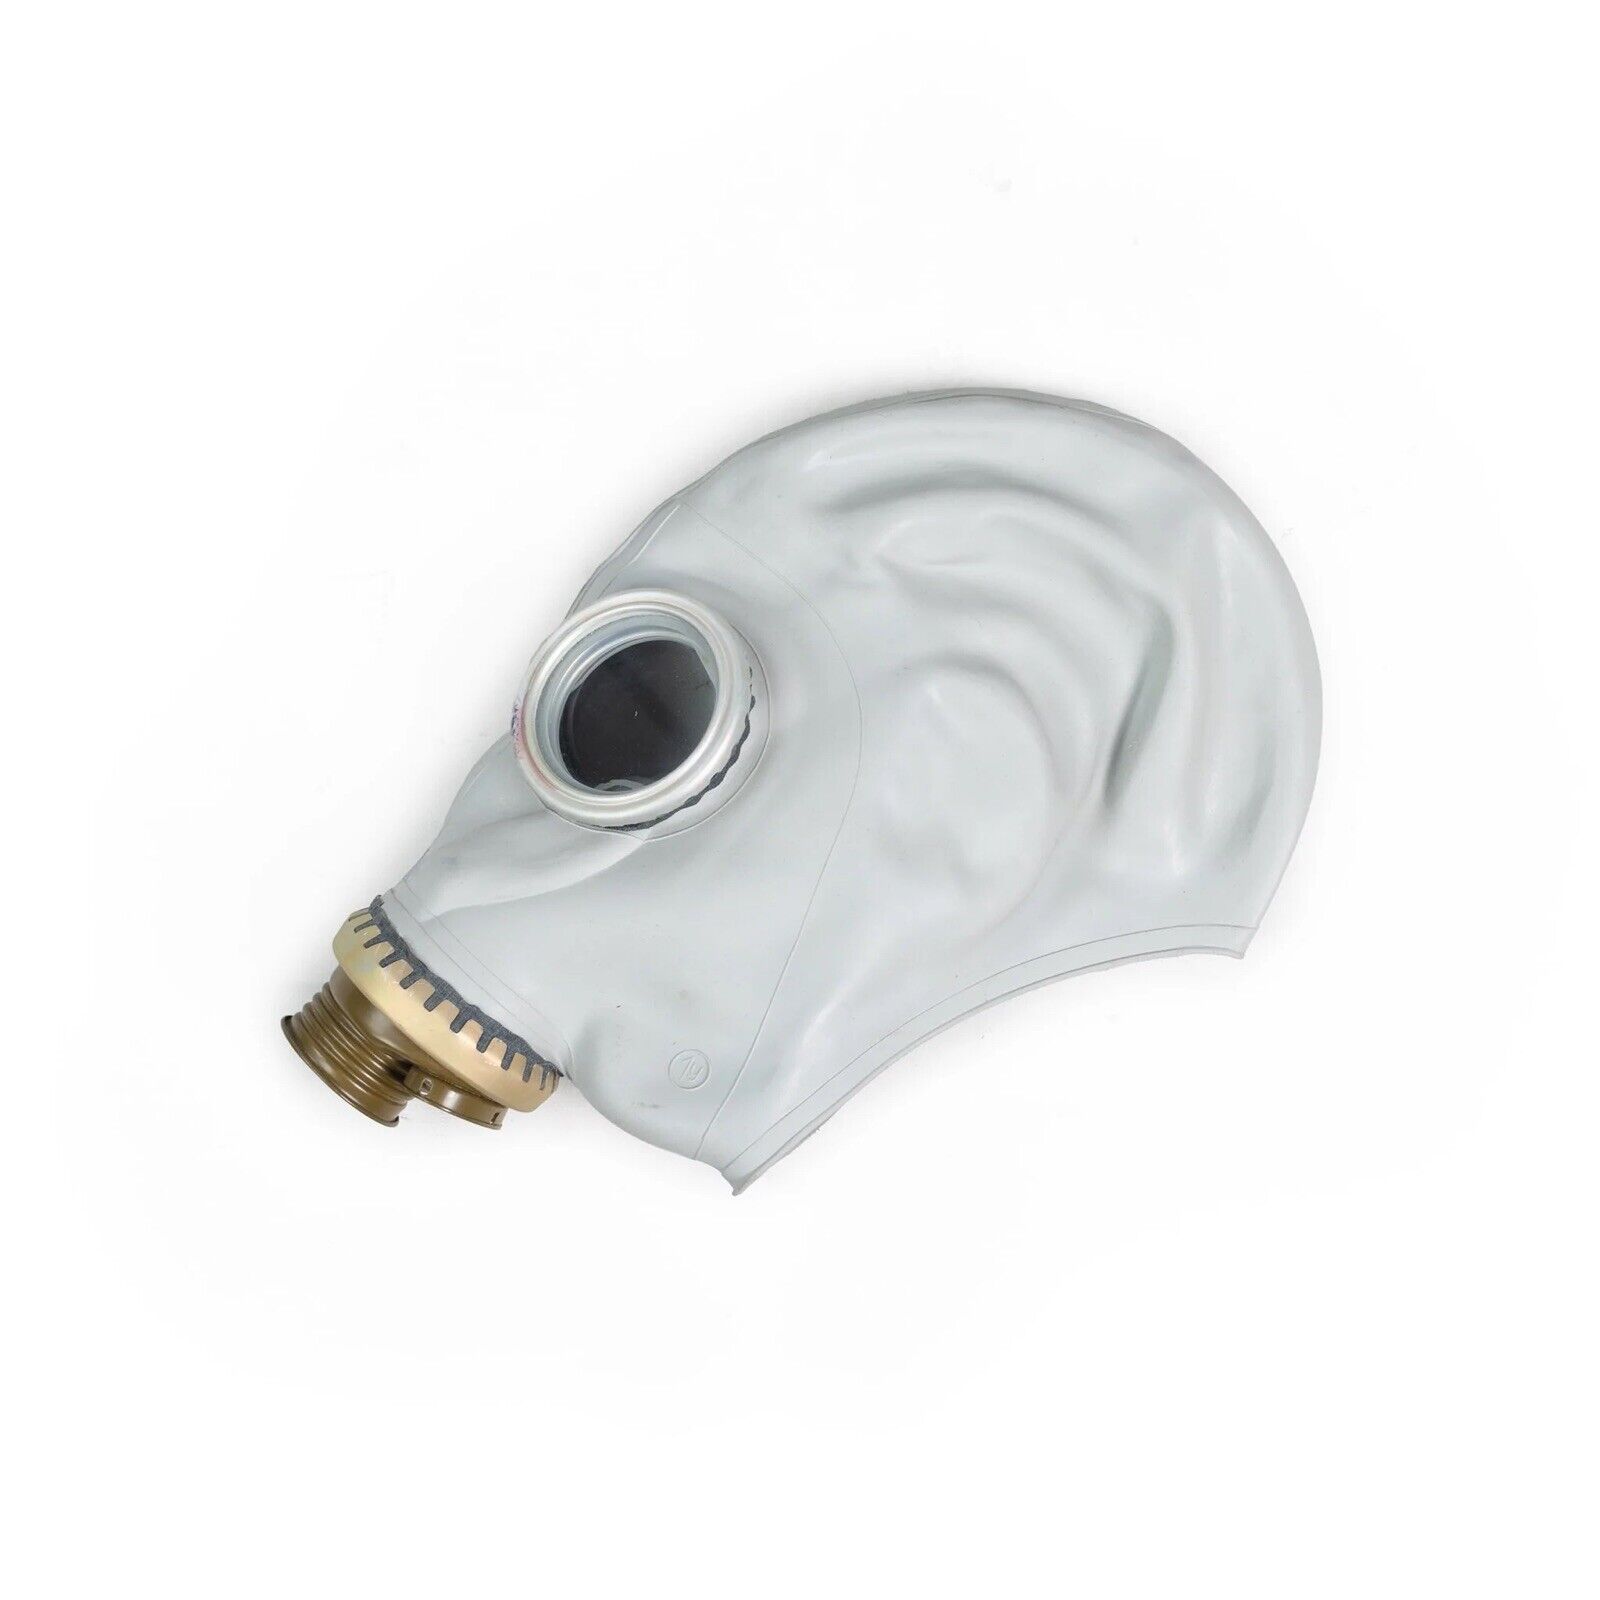 gp-5 gas mask  And Carrying Bag  No Filter - White Size Medium